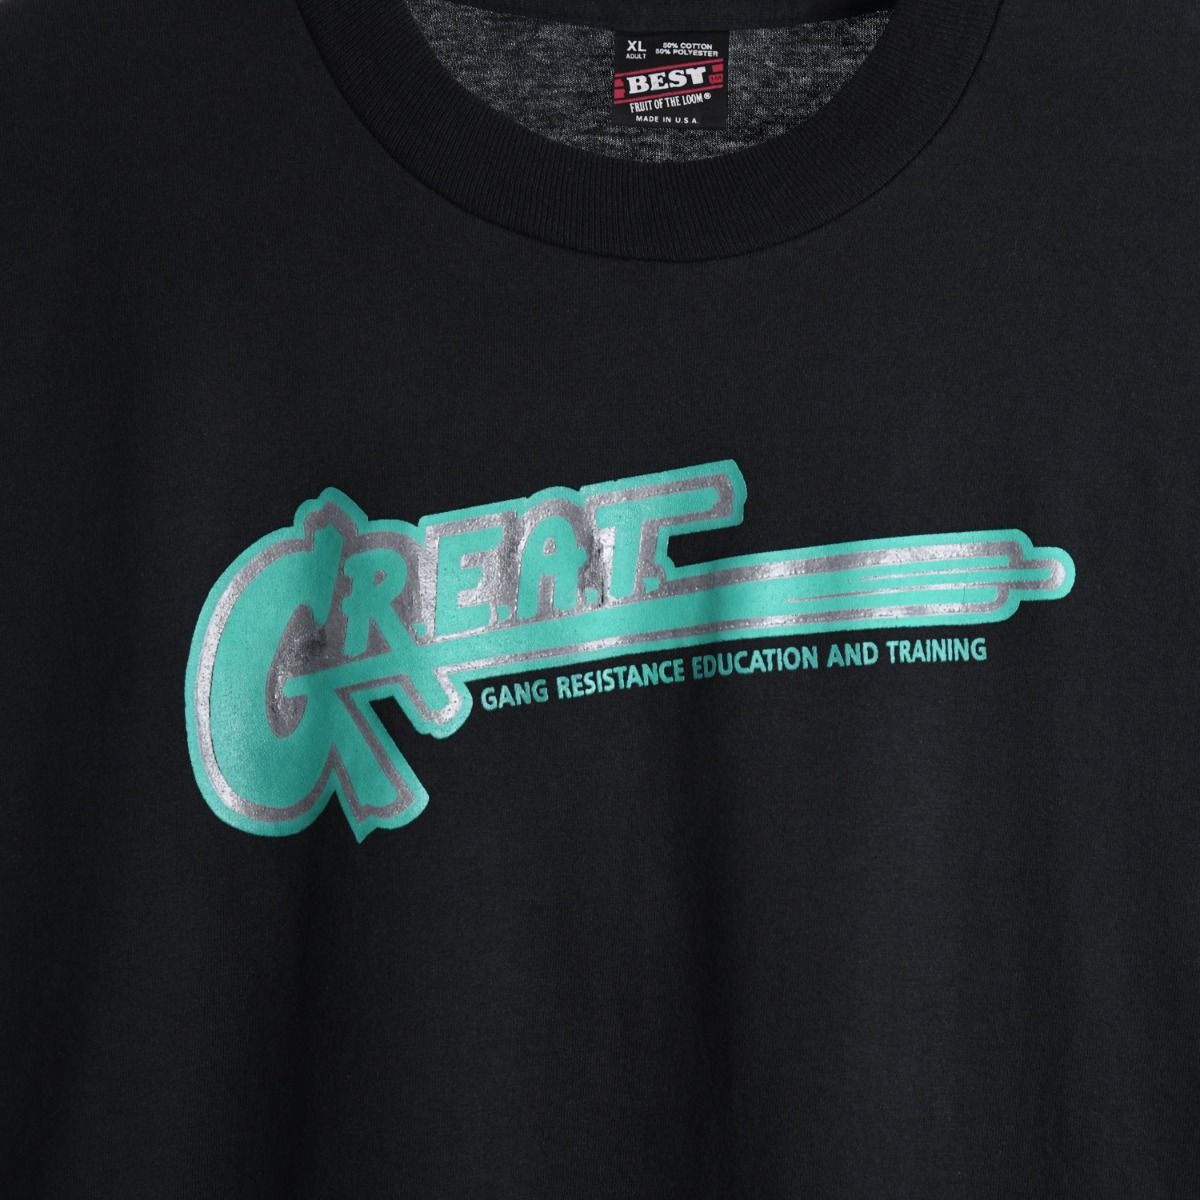 G.R.E.A.T. Gang Resistance Education And Training 1990s T-Shirt